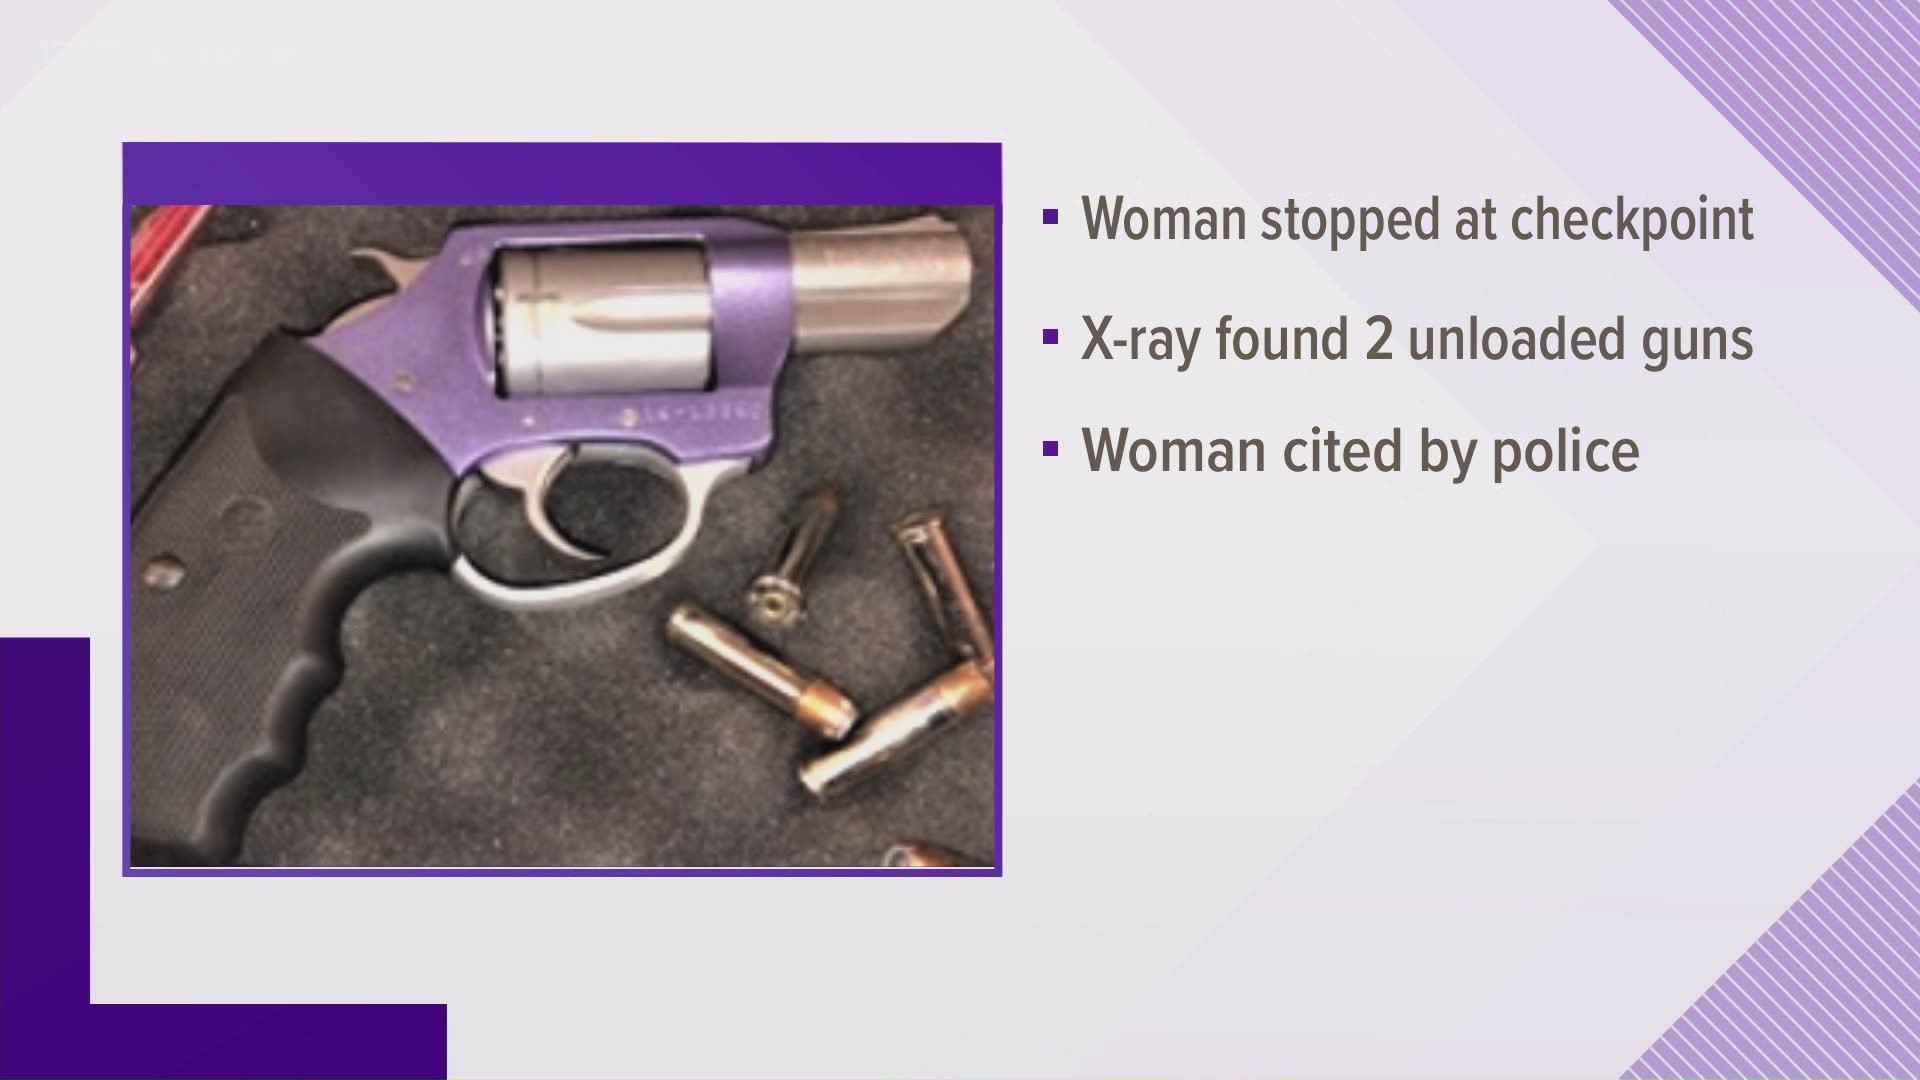 The woman was carrying a .40 caliber semi-automatic handgun and .38 caliber revolver. Neither weapon was loaded.